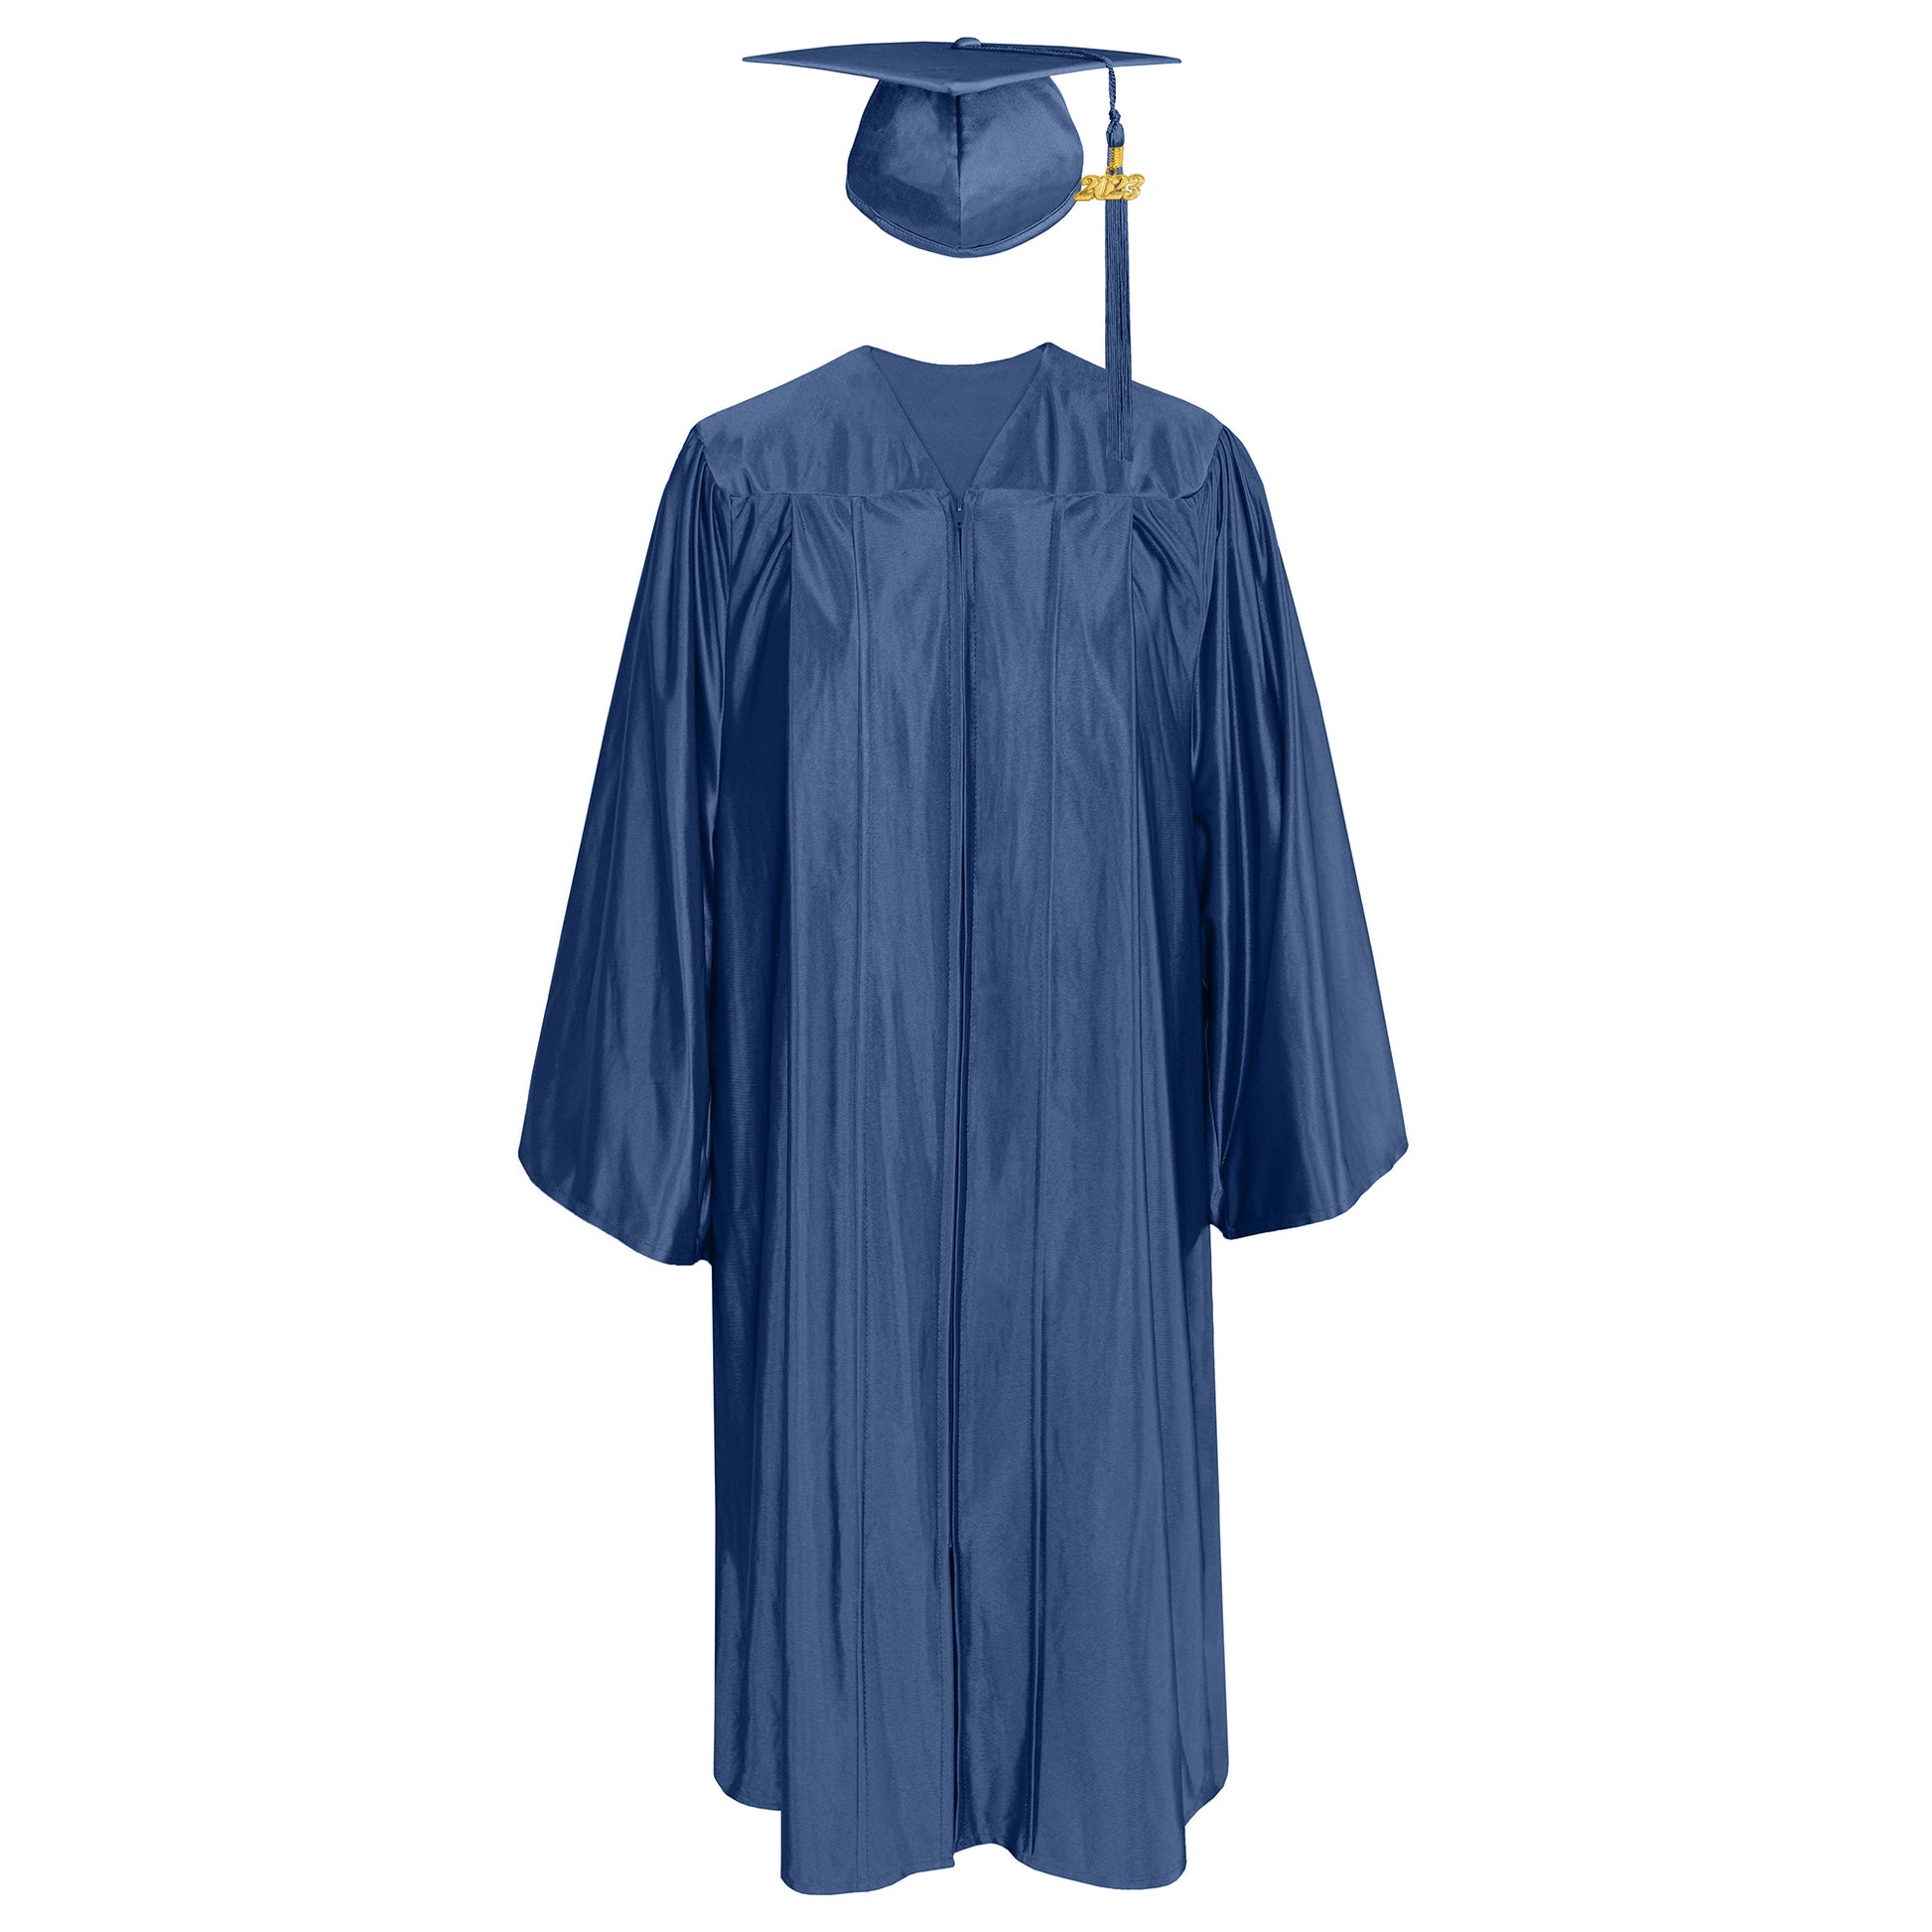 Shiny Graduation Gown & Cap with Tassel Charm 2023|2024 for Middle & High School | Bachelor Degree-CA graduation